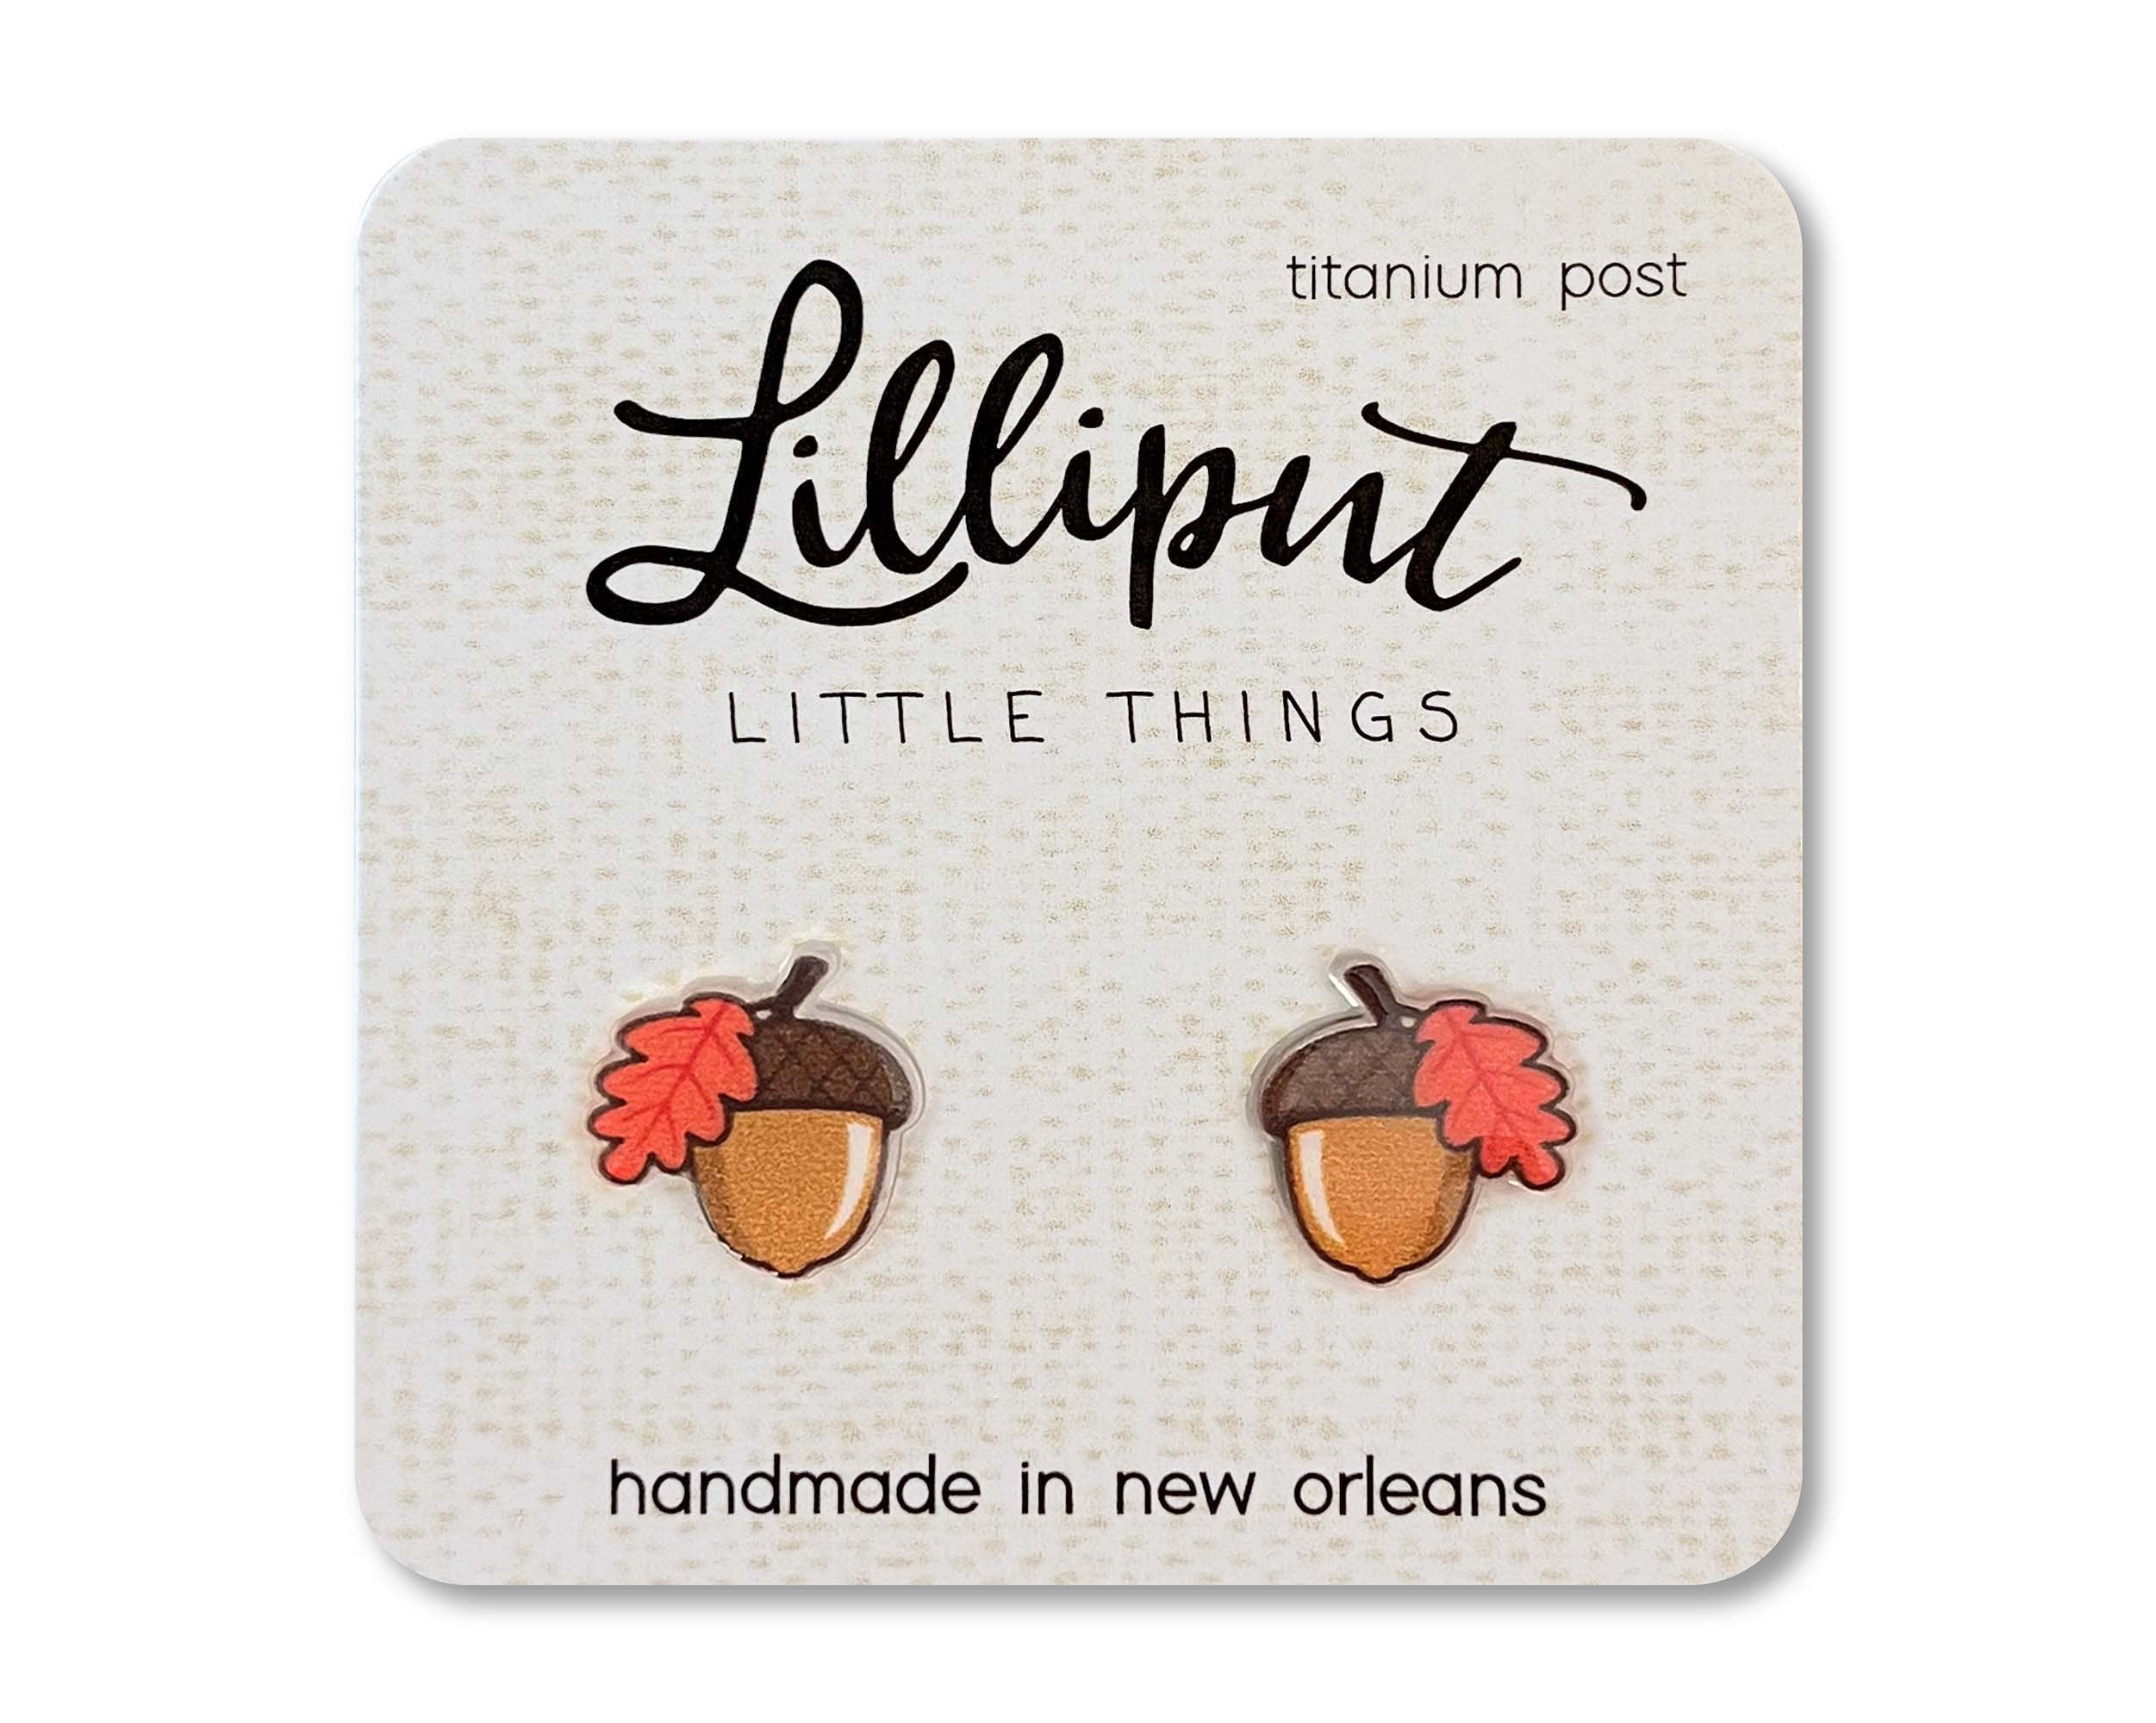 Products – Lilliput Little Things